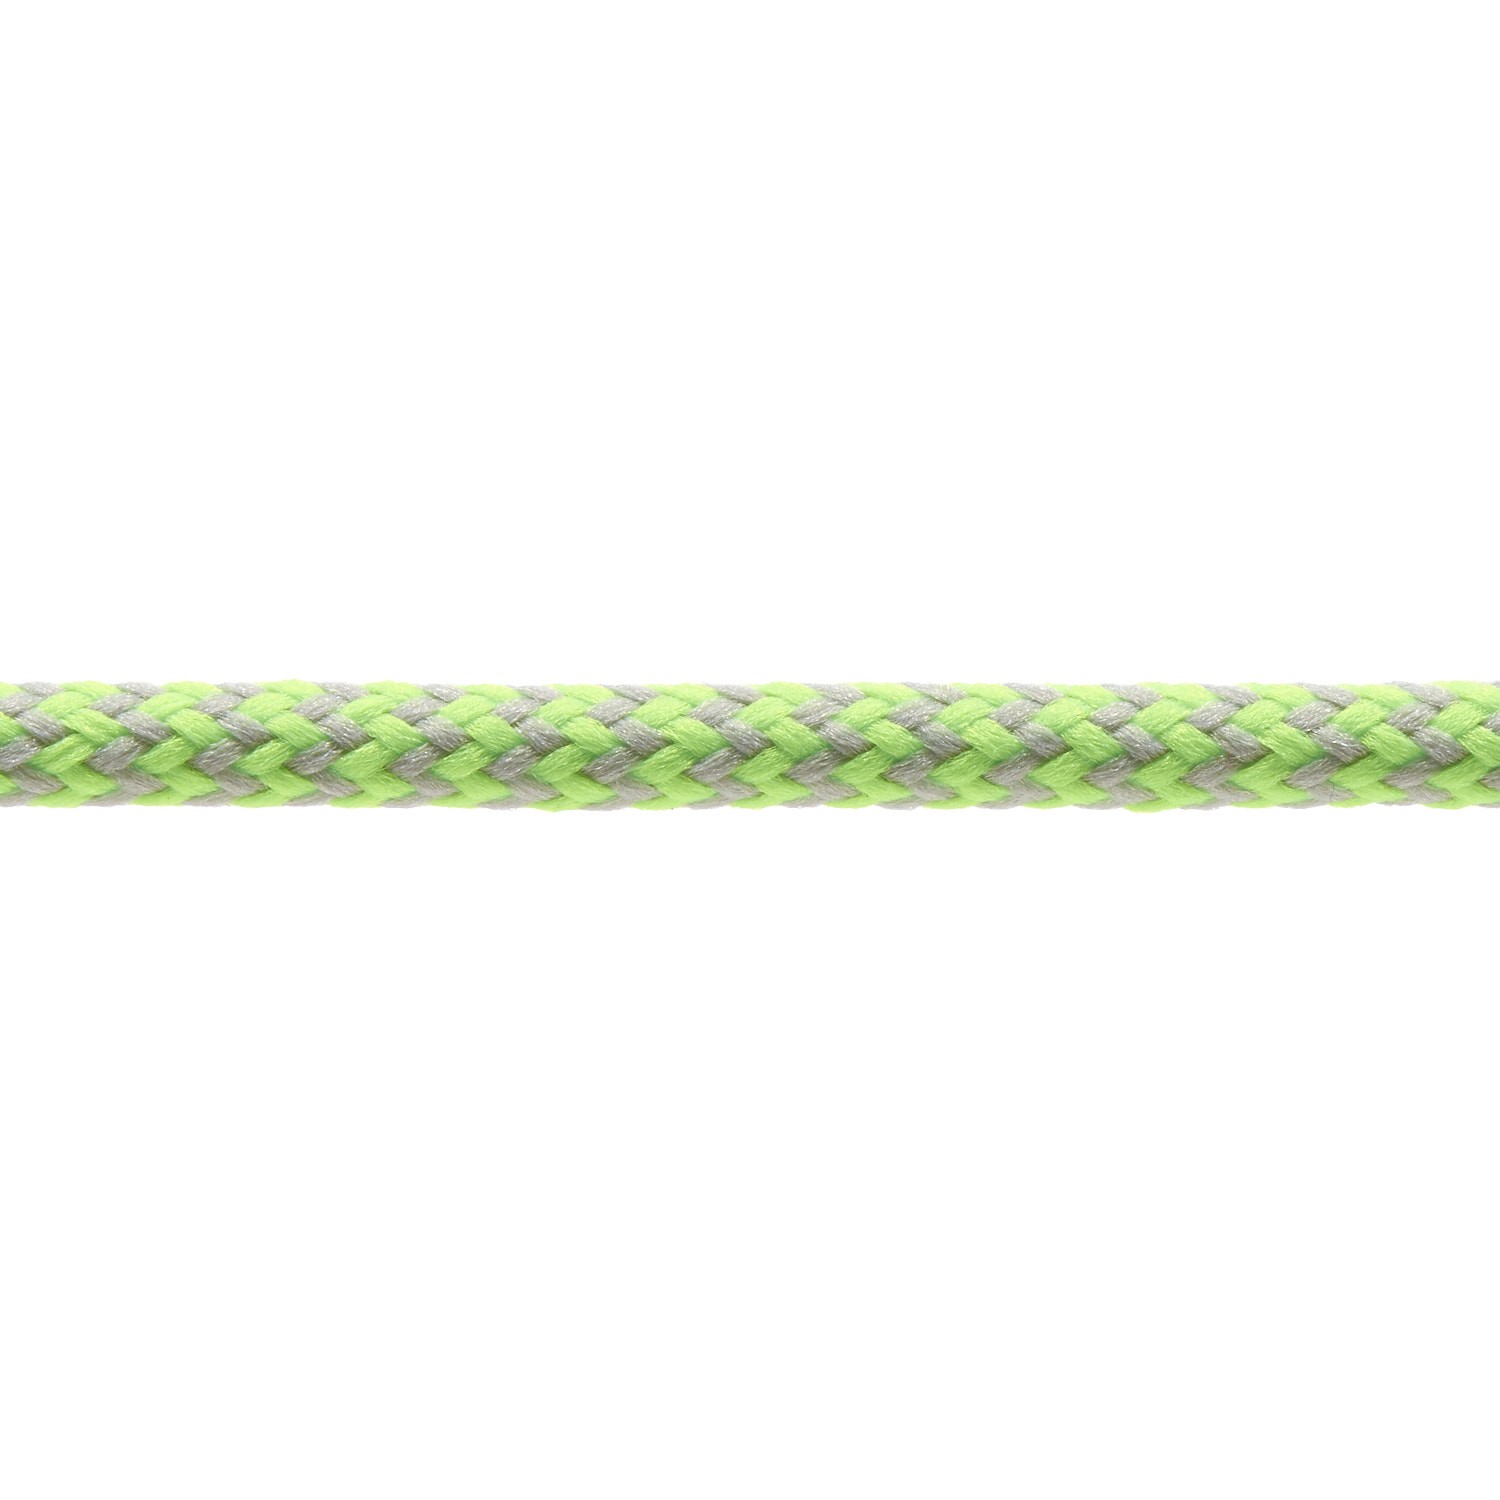 T621 5mm Round Cord Herringbone Shoe Laces Light Grey Fluorescent Lime 3 Kalsi Cords